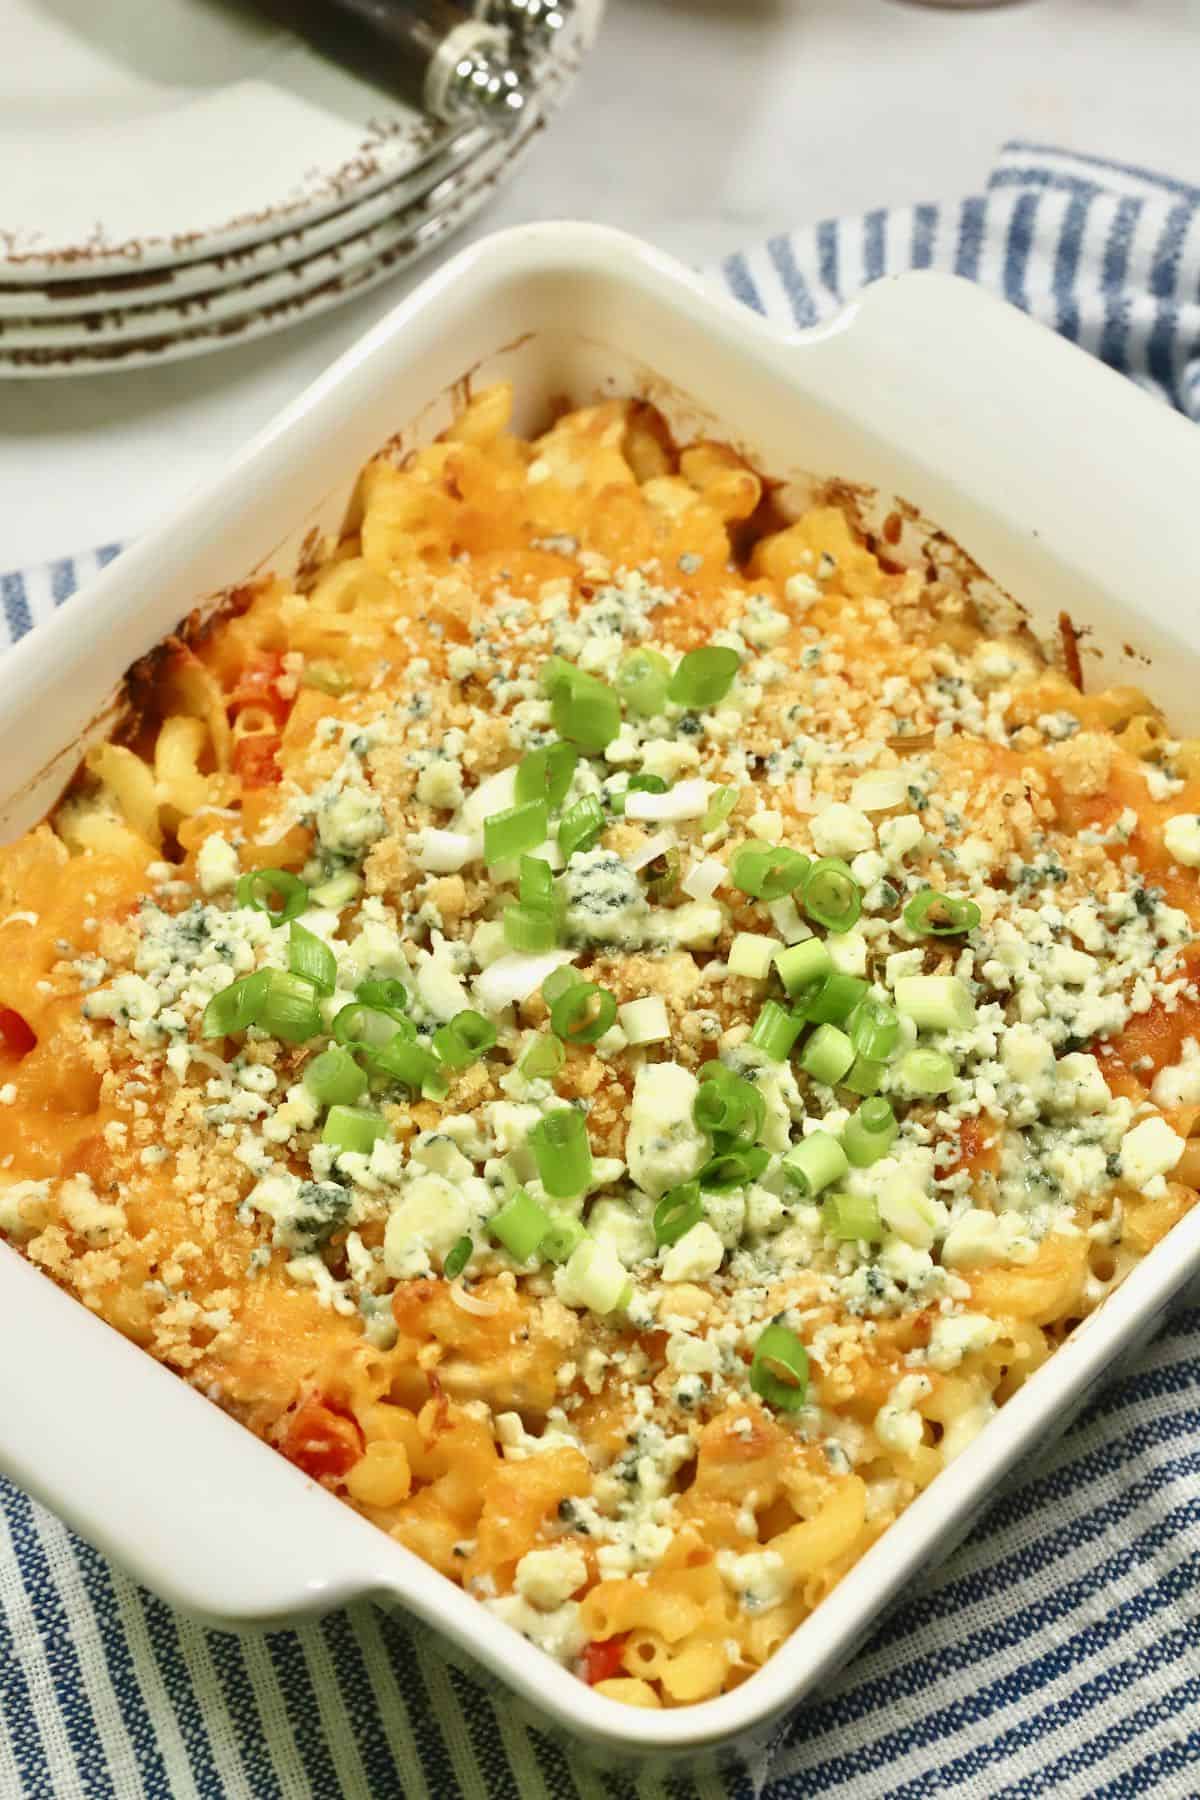 Baked Buffalo Chicken Pasta in a white baking dish.